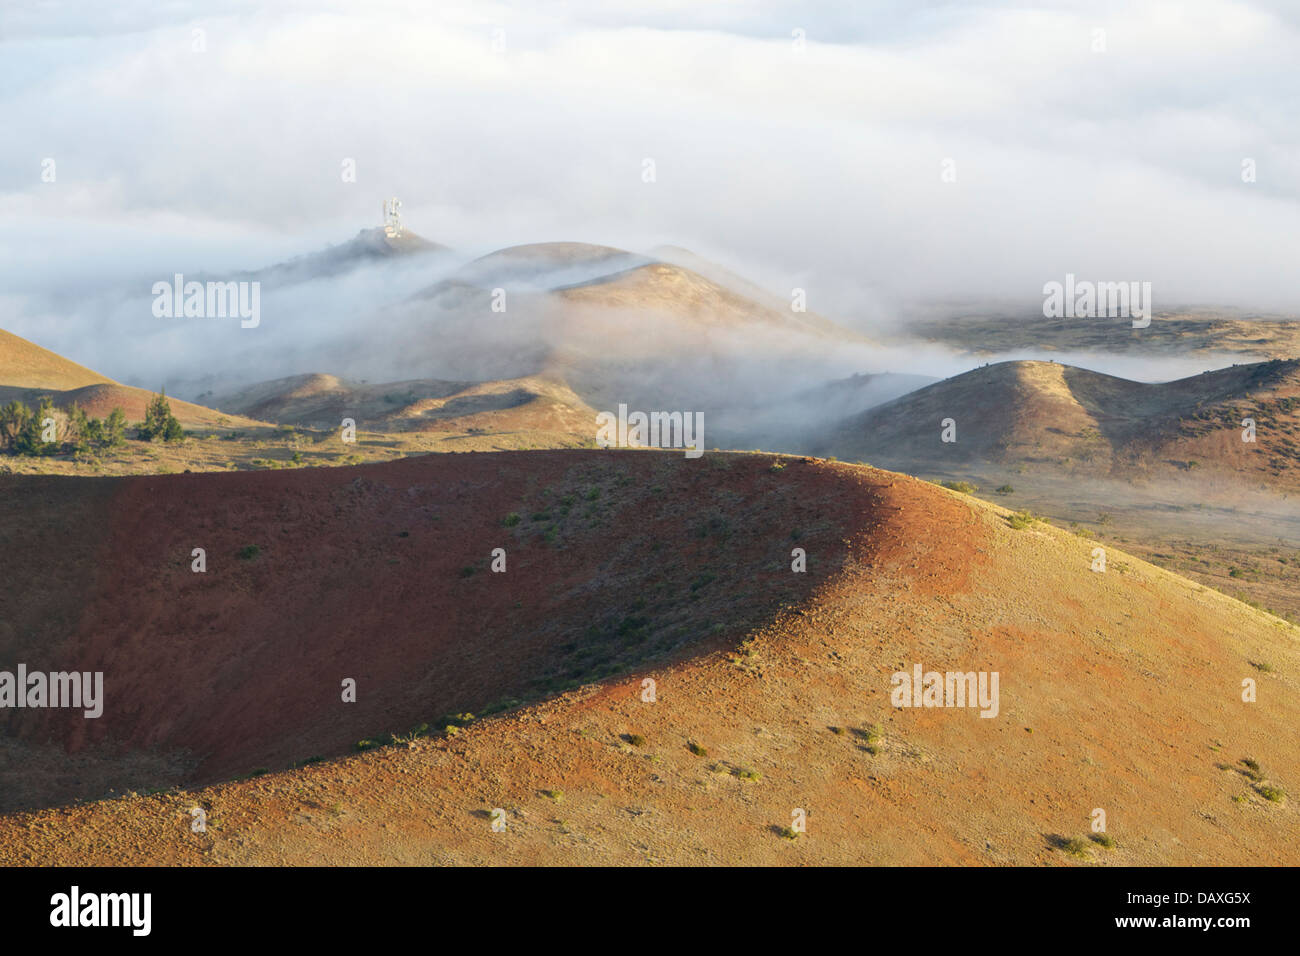 Clouds flowing over cinder cones on the flanks of dormant volcano Mauna Kea, on the Big Island of Hawaii. Stock Photo